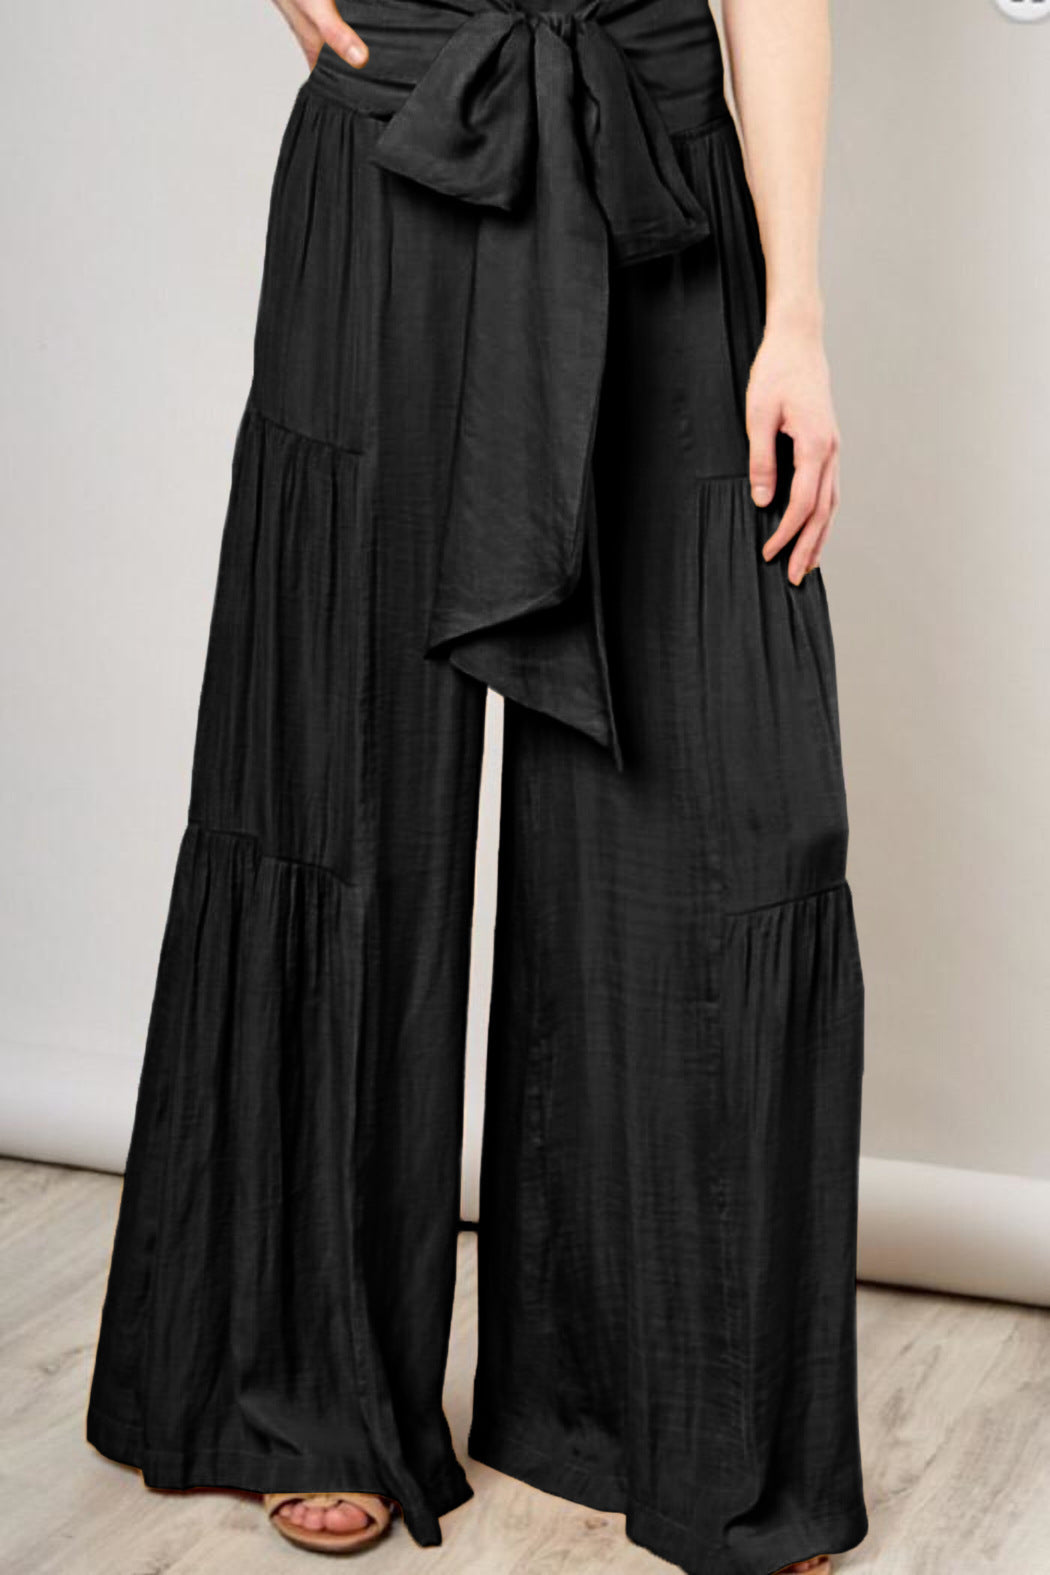 Casual Elastic Waist Wide Legs Pants-Women Bottoms-Black-S-Free Shipping Leatheretro